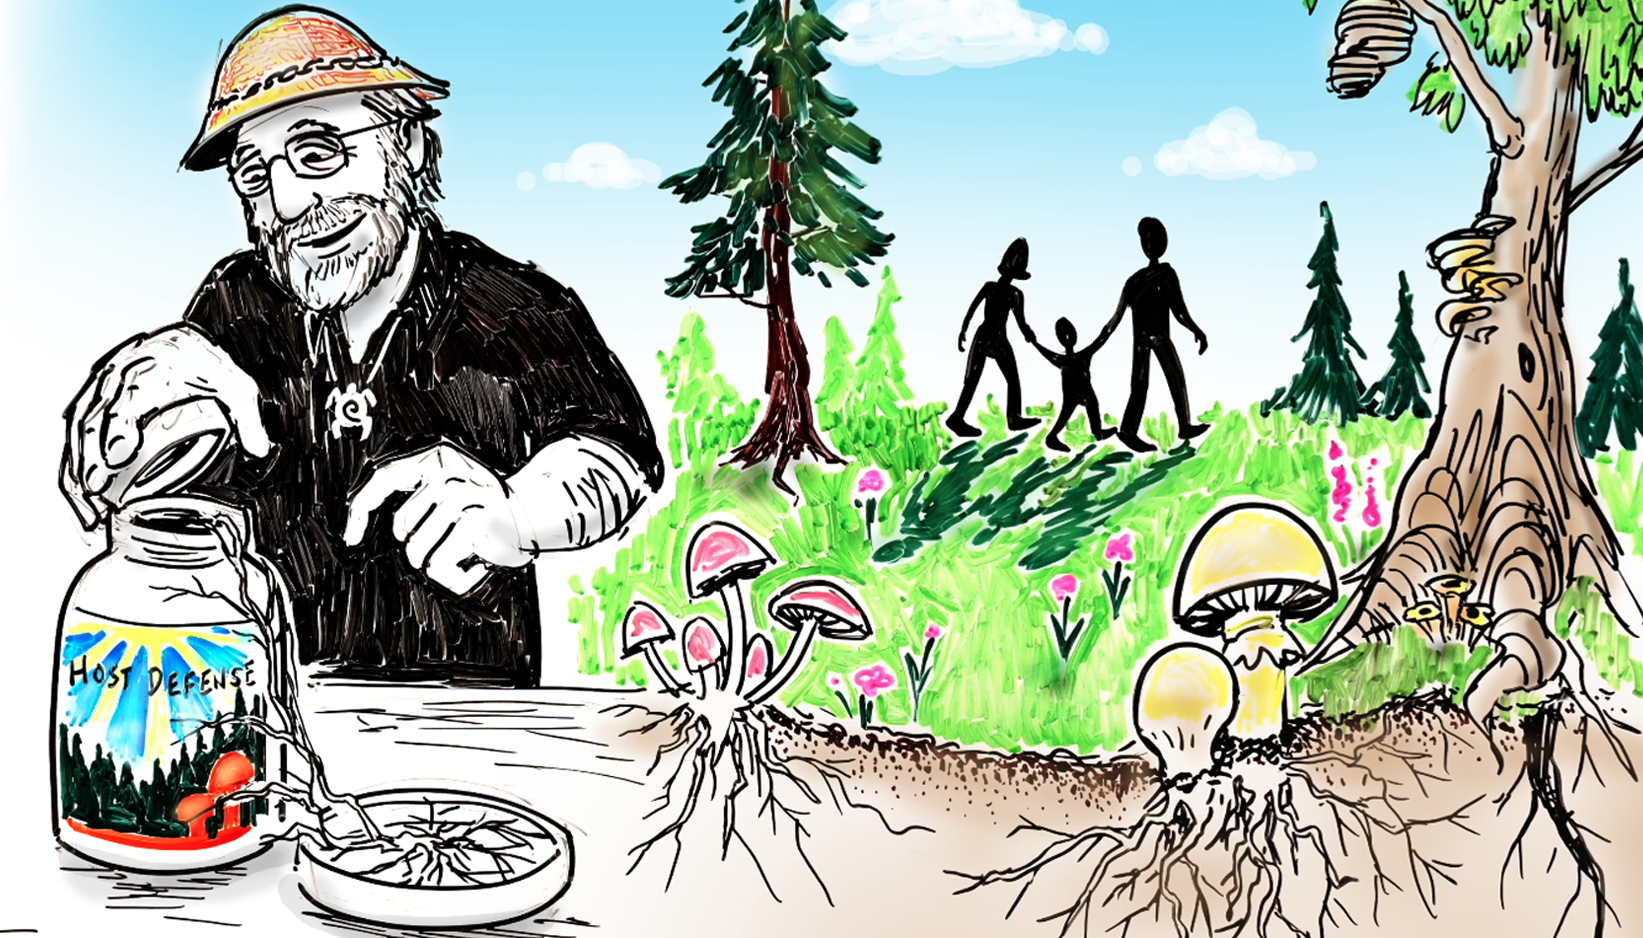 Mycelium Comes to Life With Paul Stamets!